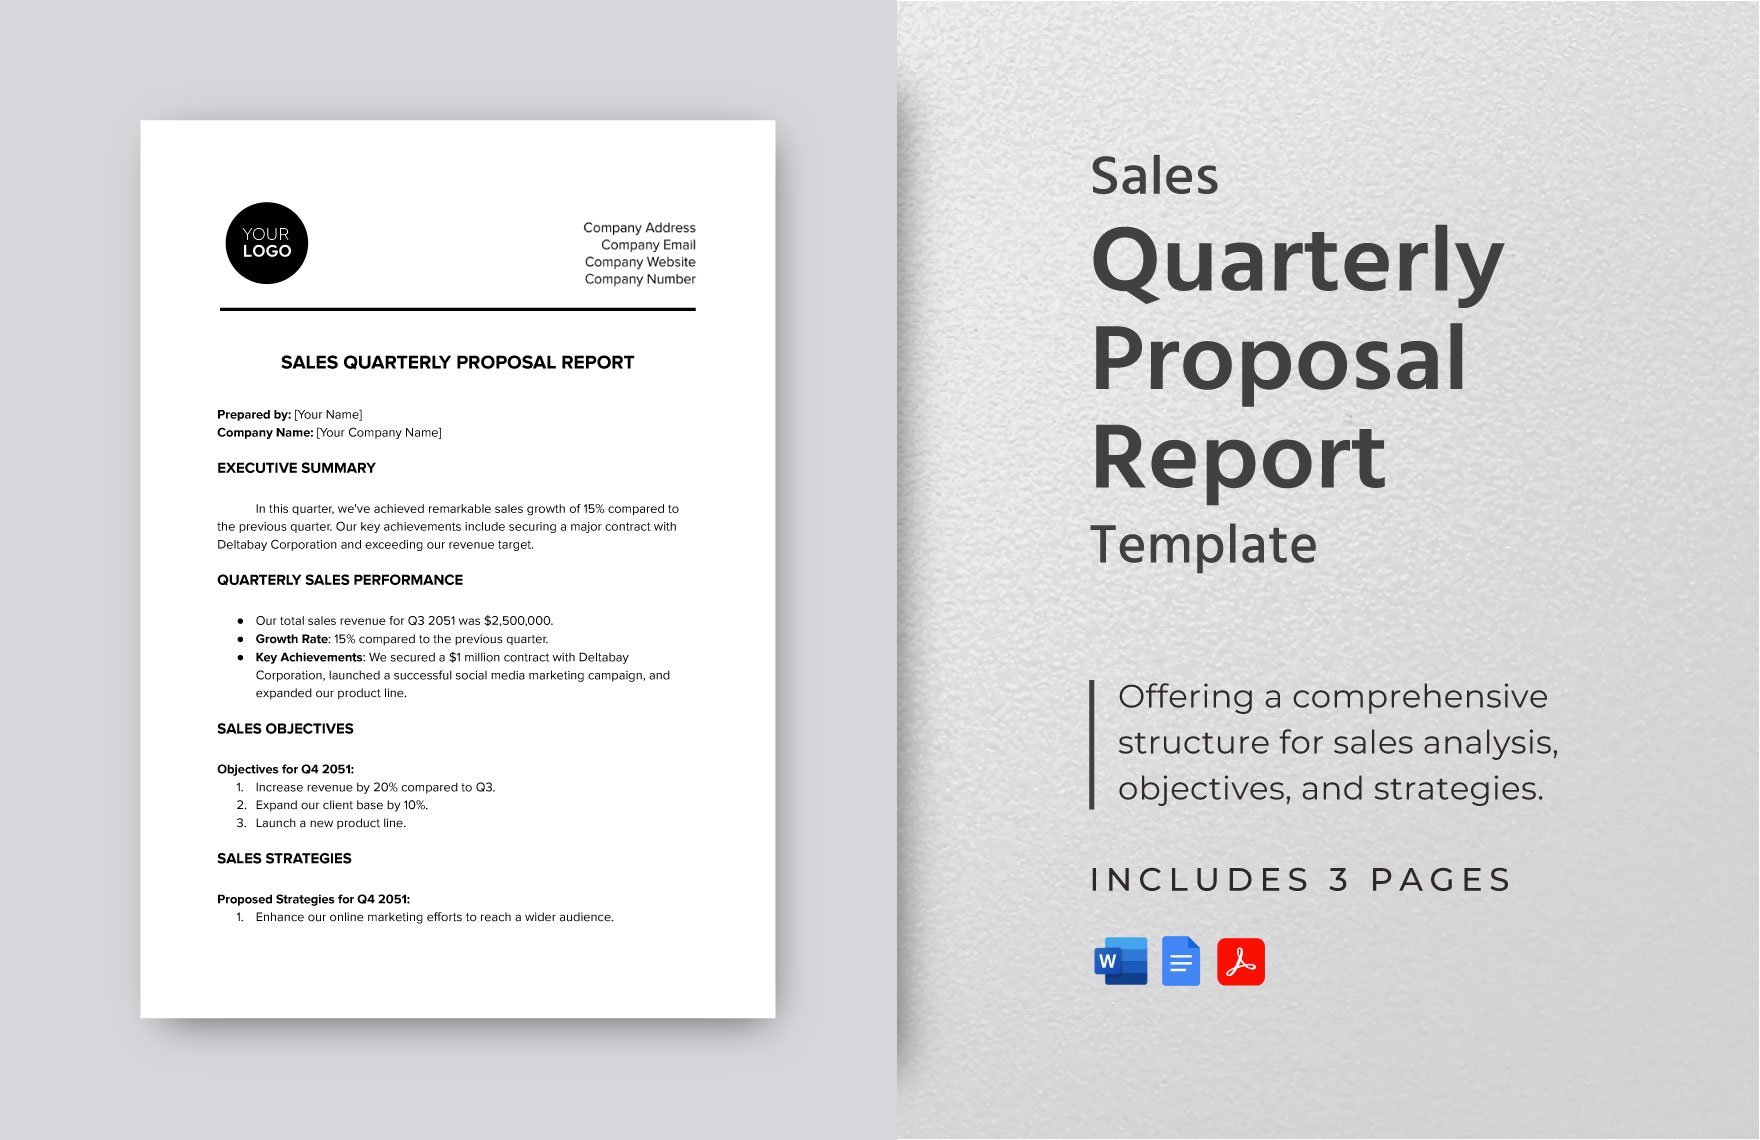 Sales Quarterly Proposal Report Template in Word, Google Docs, PDF